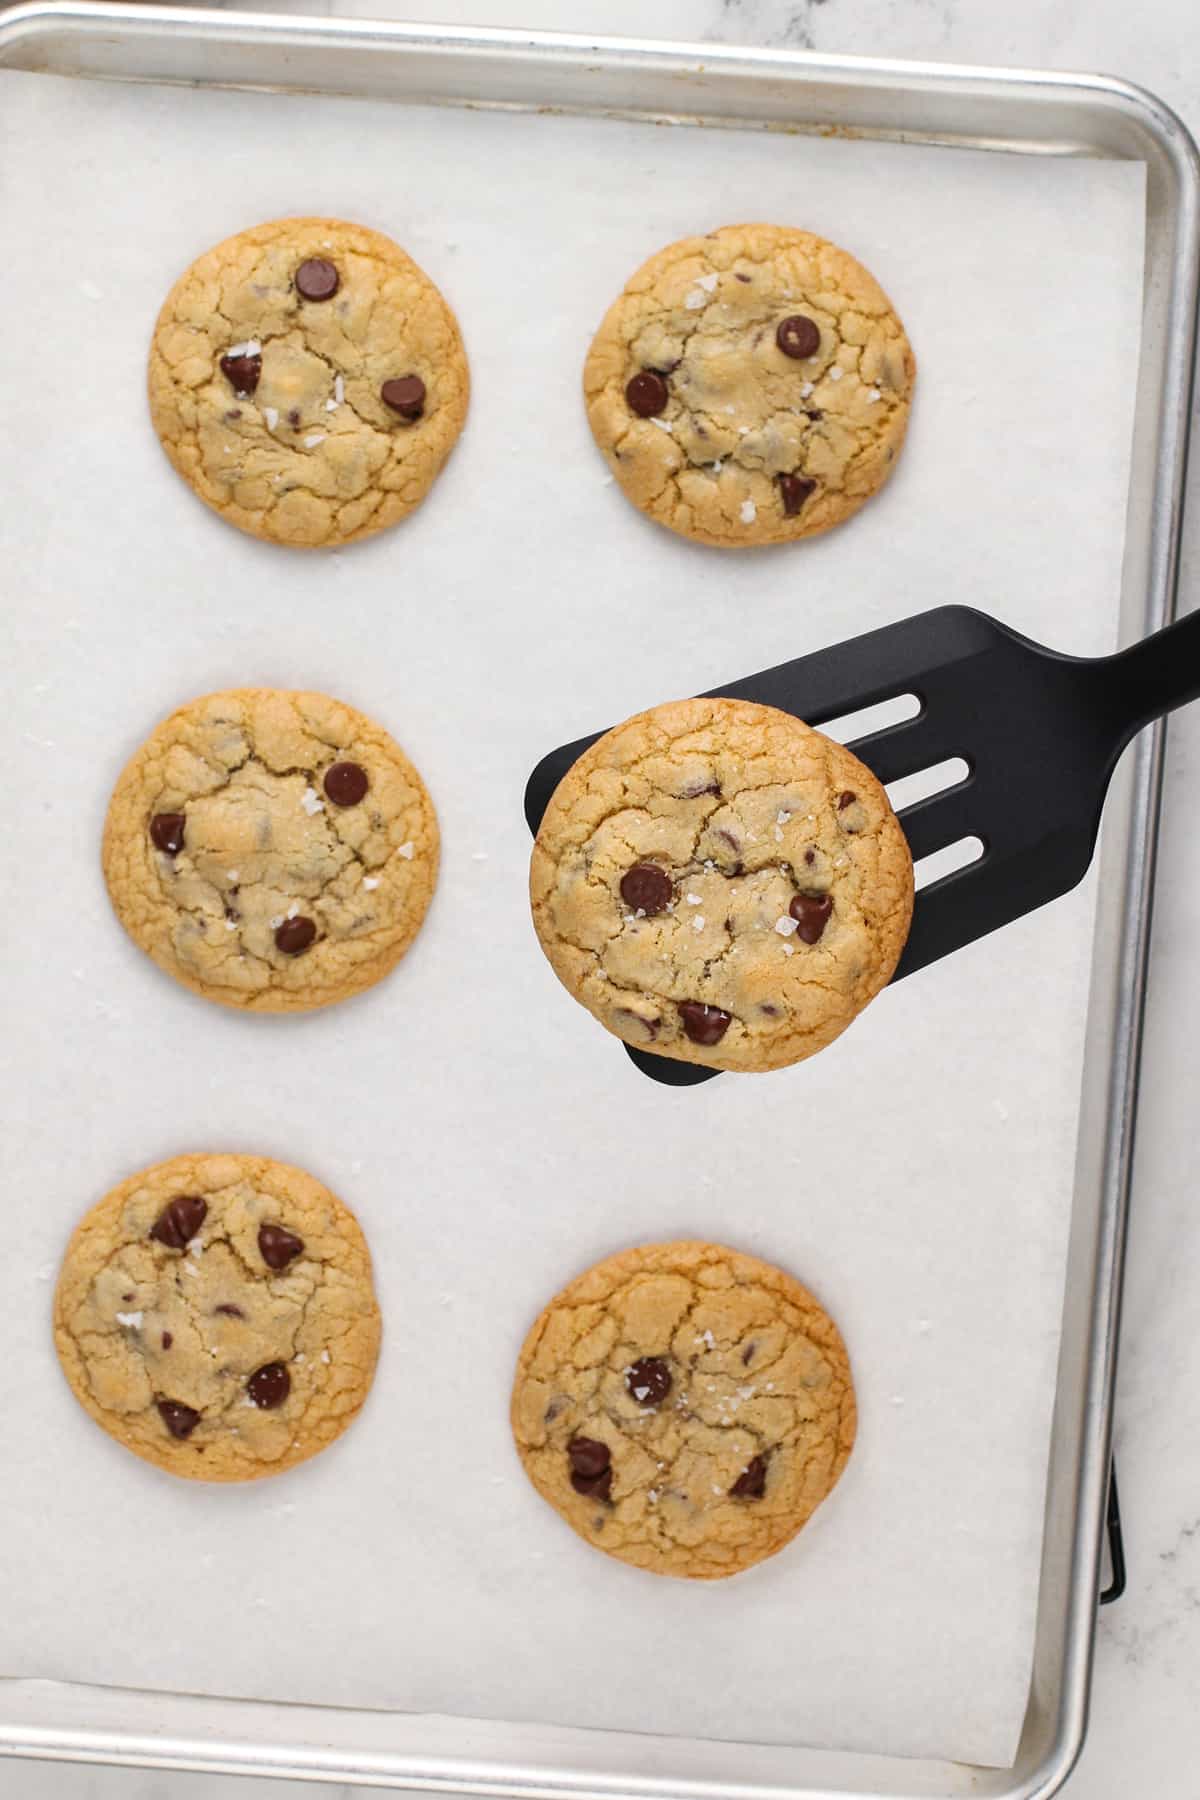 Spatula lifting a baked grand floridian chocolate chip cookie up from a baking sheet.